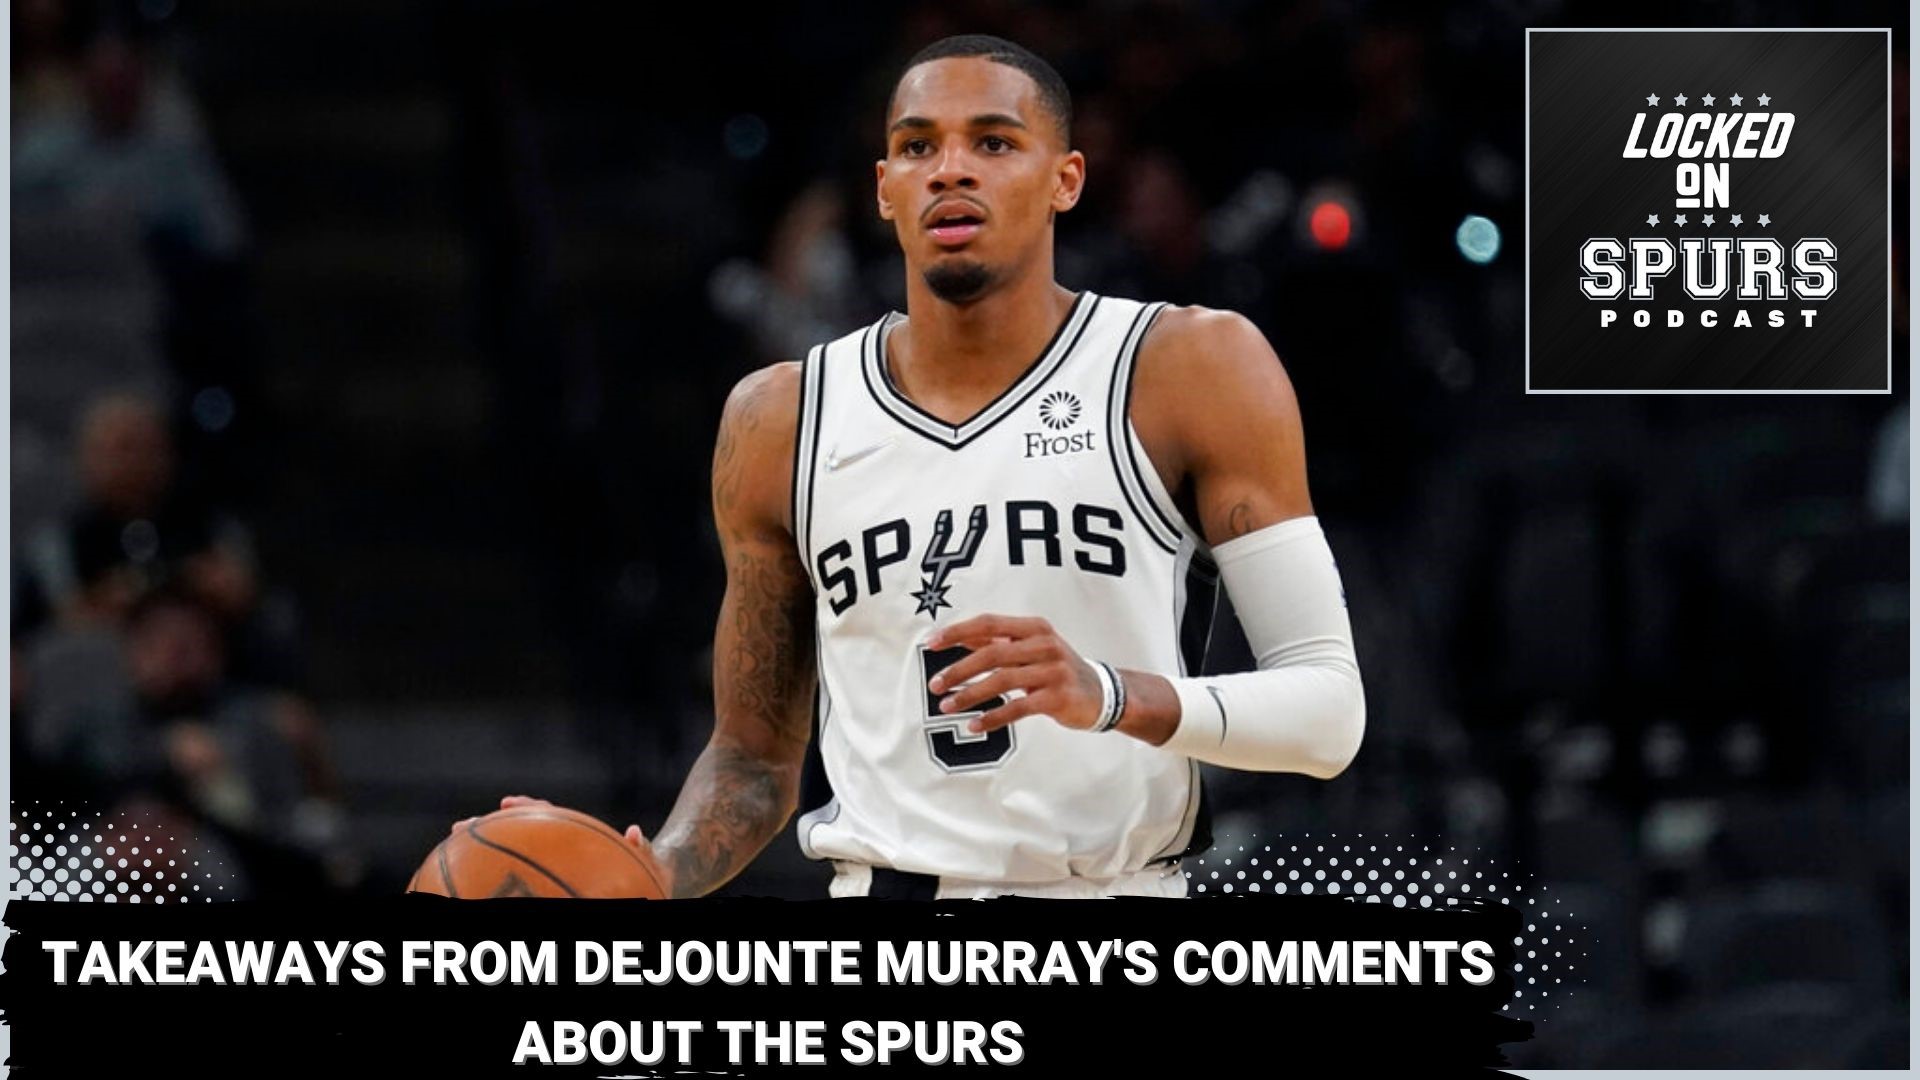 Murray riled up the Spurs fanbase with some critical thoughts on the Silver and Black.